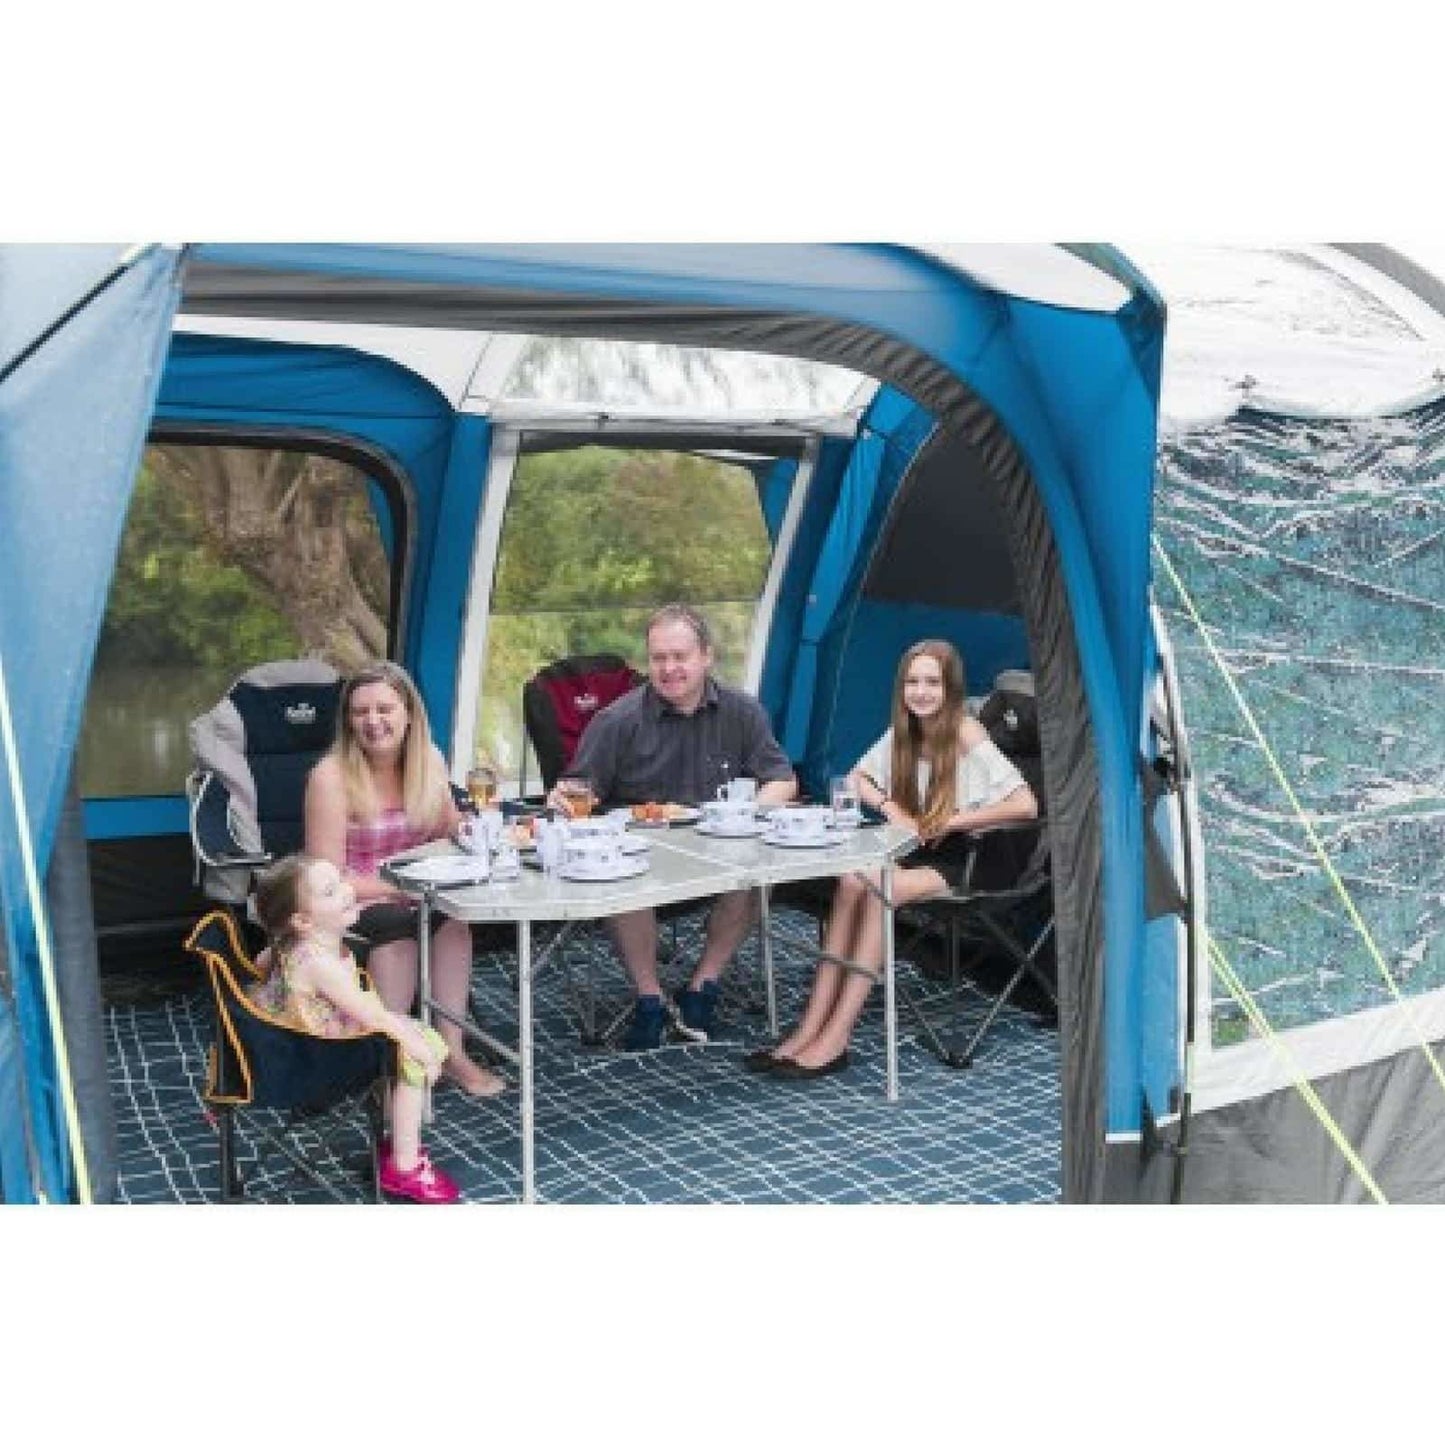 Royal Buckland 8 Person - Blue Pole Tent 302630 - Quality Caravan Awnings